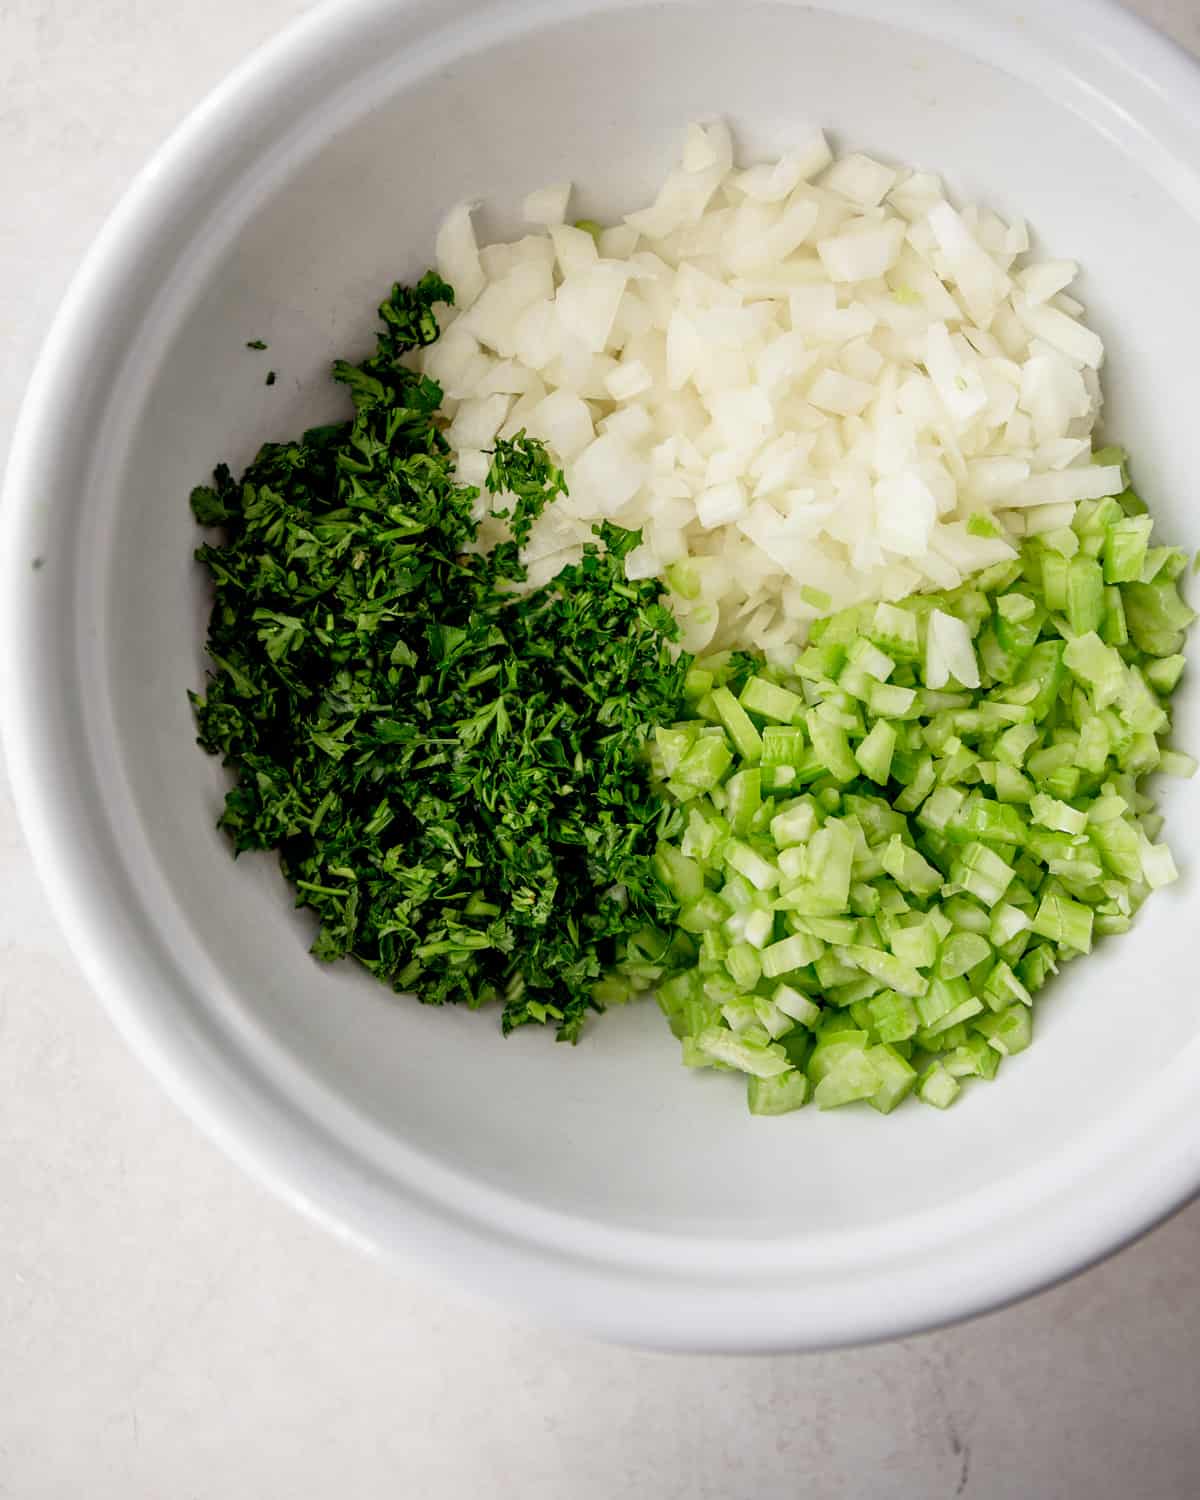 onion, celery and herbs in a large white mixing bowl